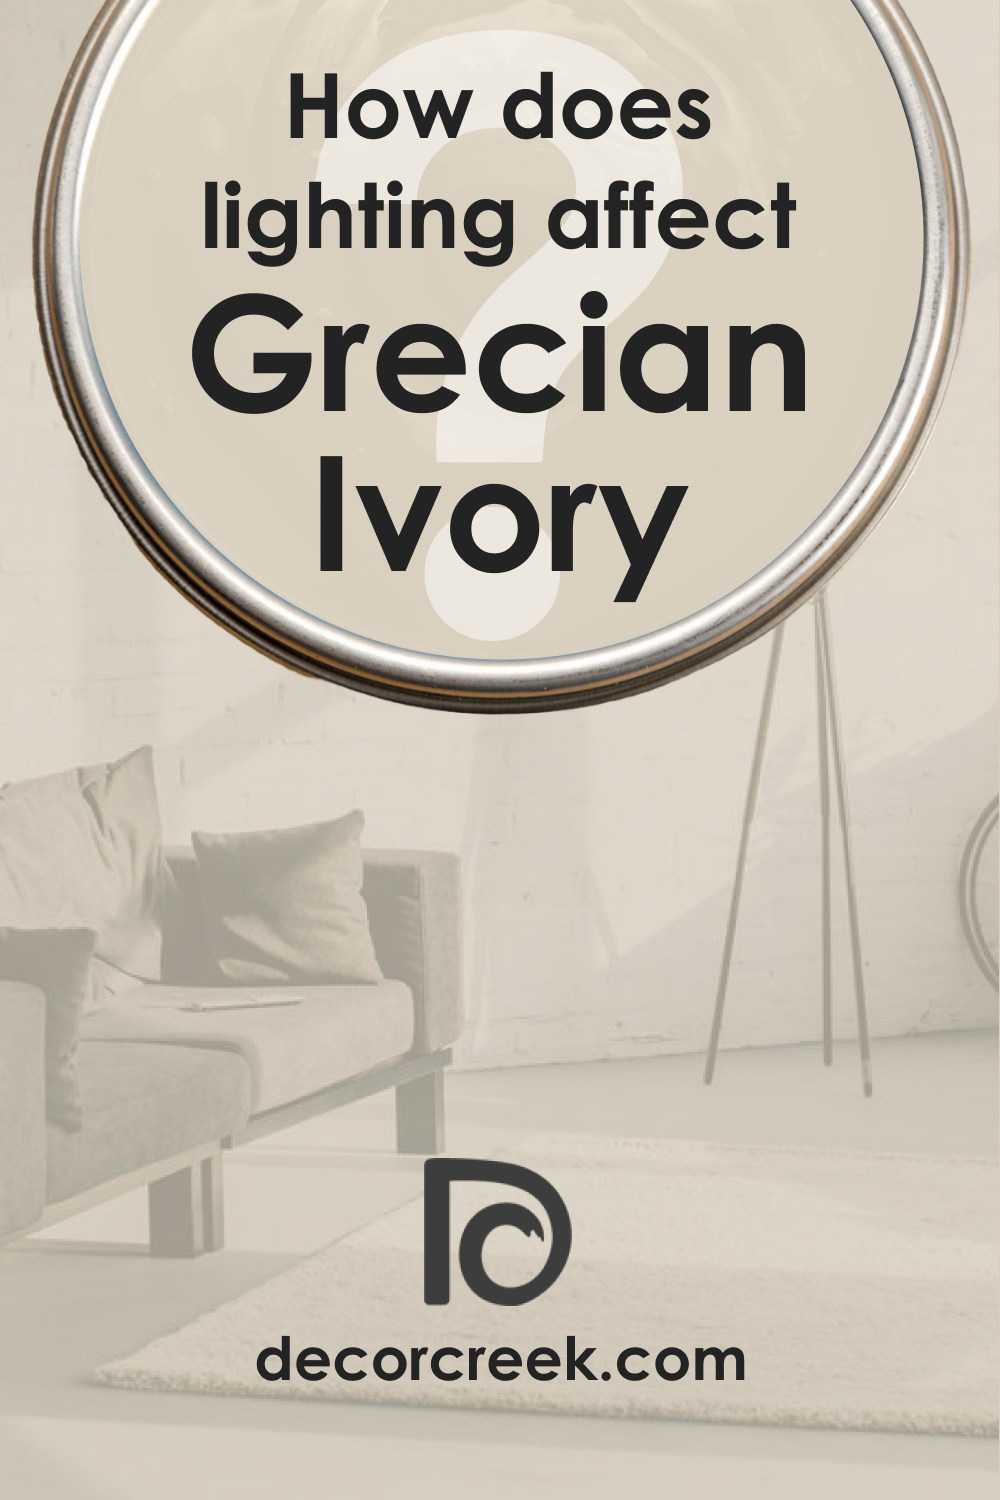 How Does Lighting Affect SW 7541 Grecian Ivory?